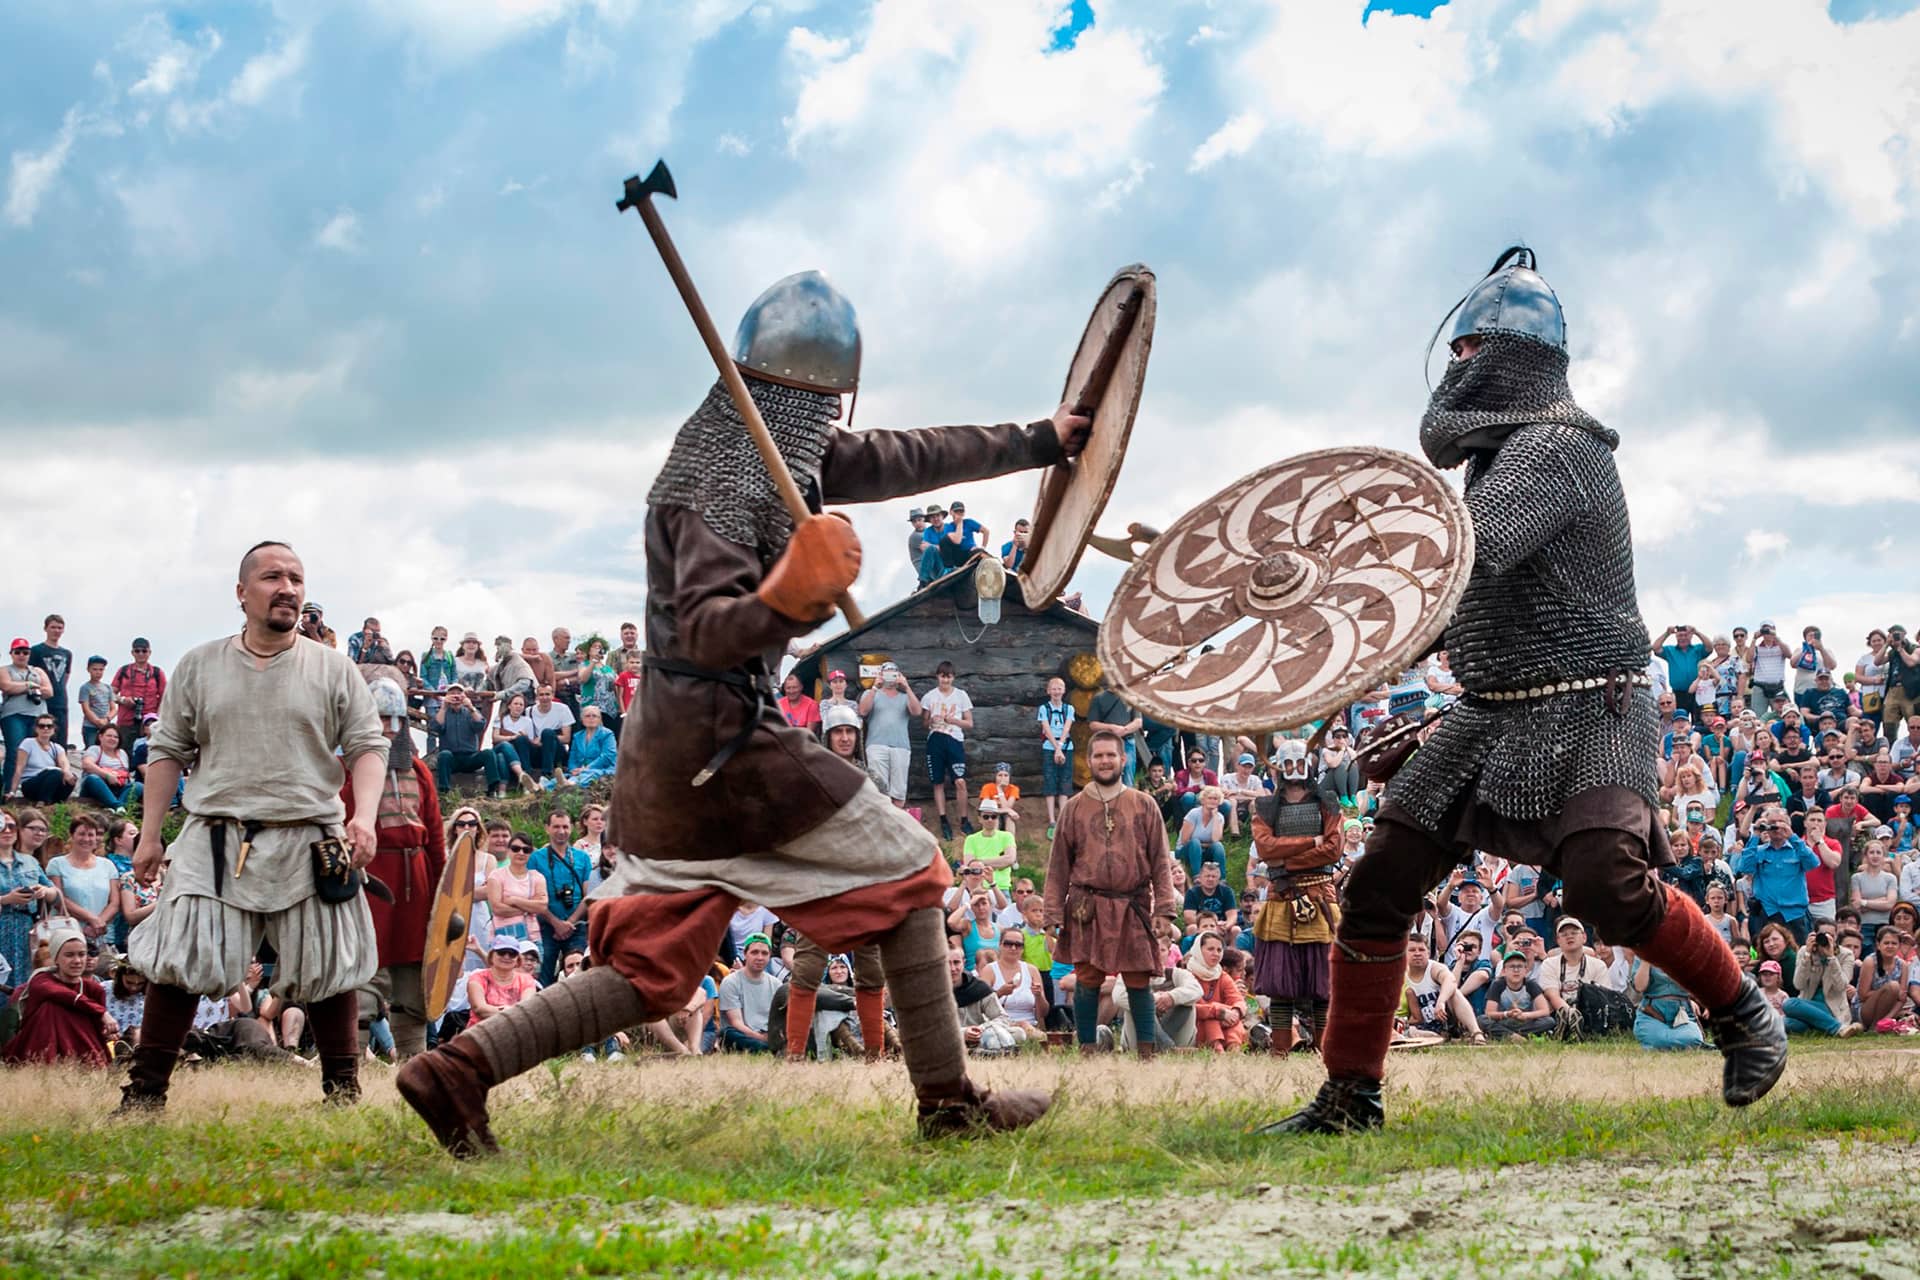 Medieval warriors wearing metal protection fighting with axes in front of audience